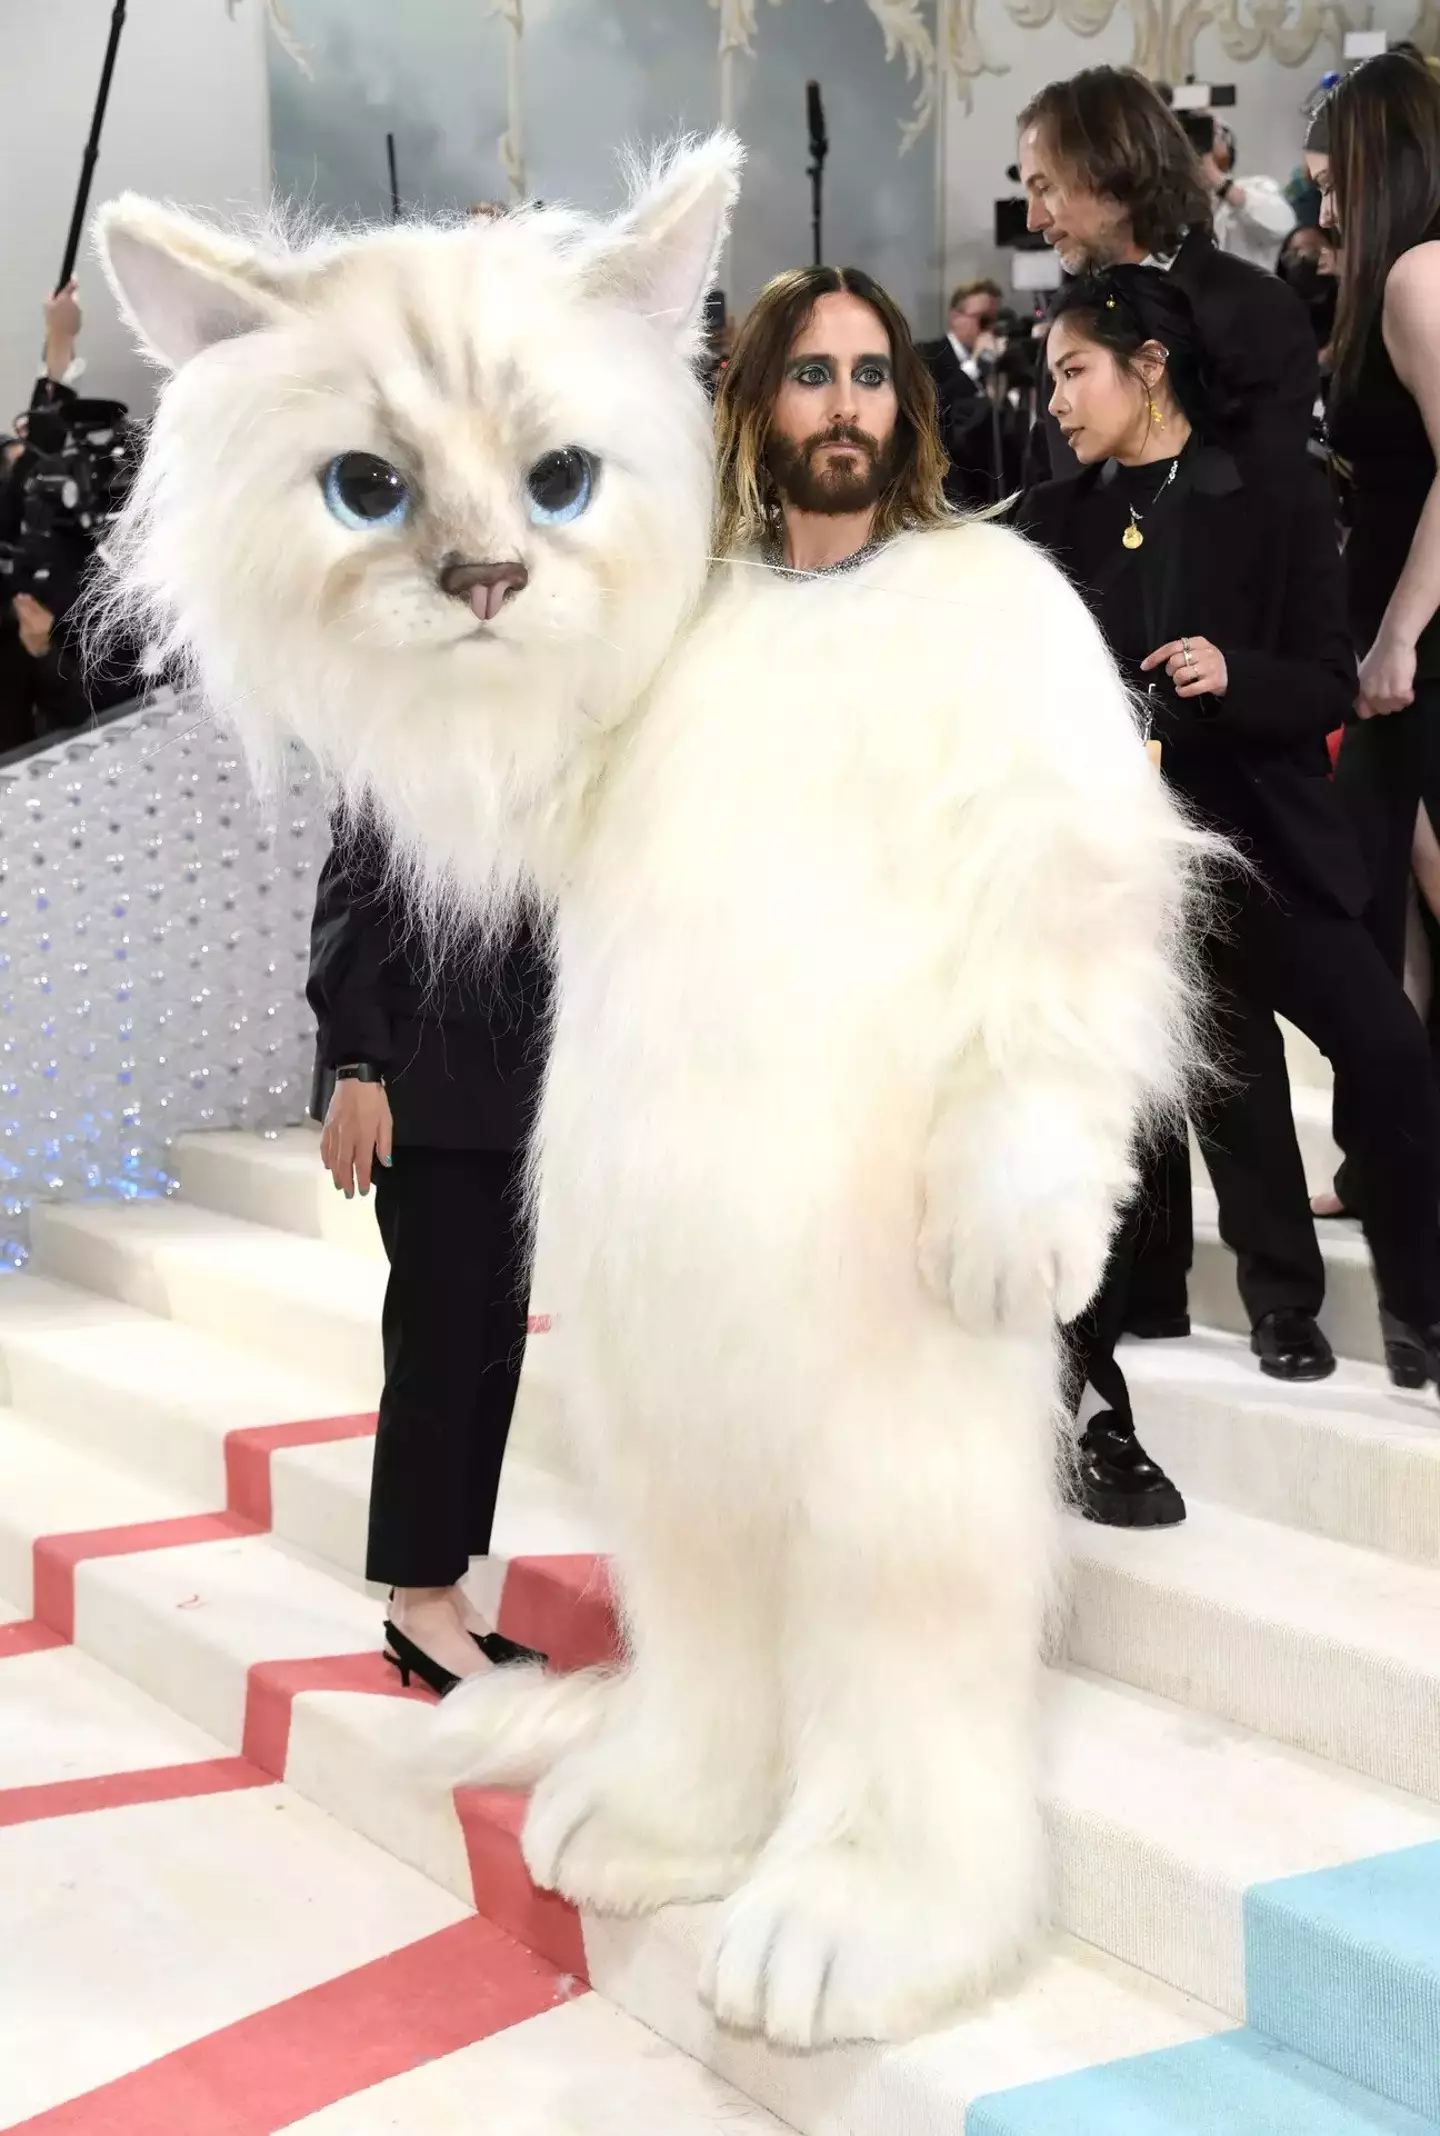 Jared Leto couldn't be missed on the Met Gala carpet.